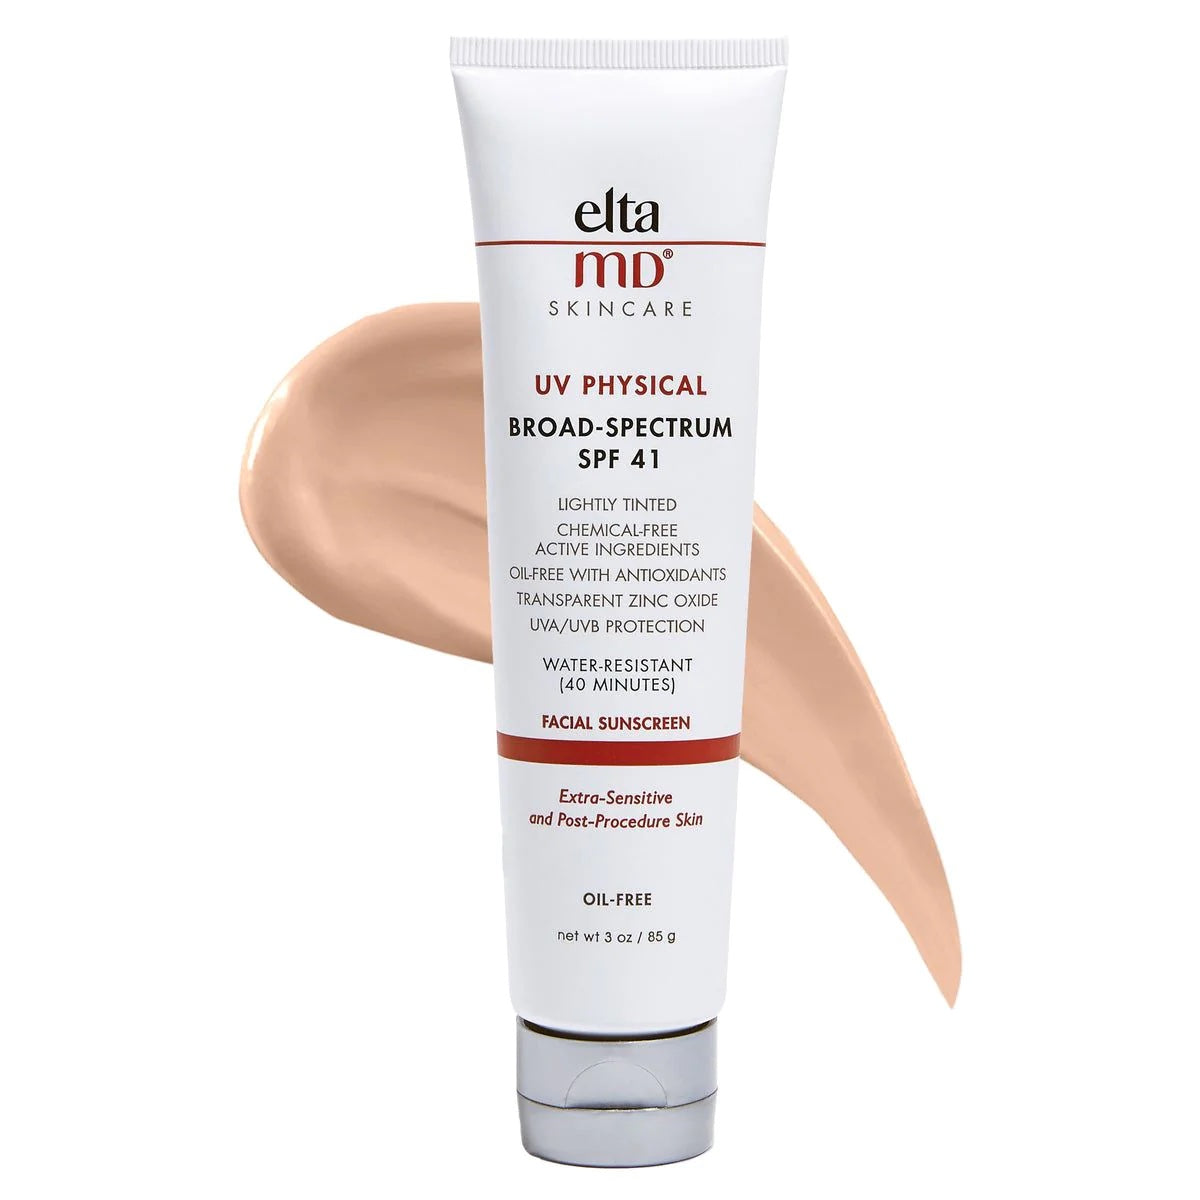 EltaMD Pure Physical Water-Resistant Facial Sunscreen SPF 41 (Tinted) - For Extra-Sensitive &amp; Post-Procedure Skin 85g